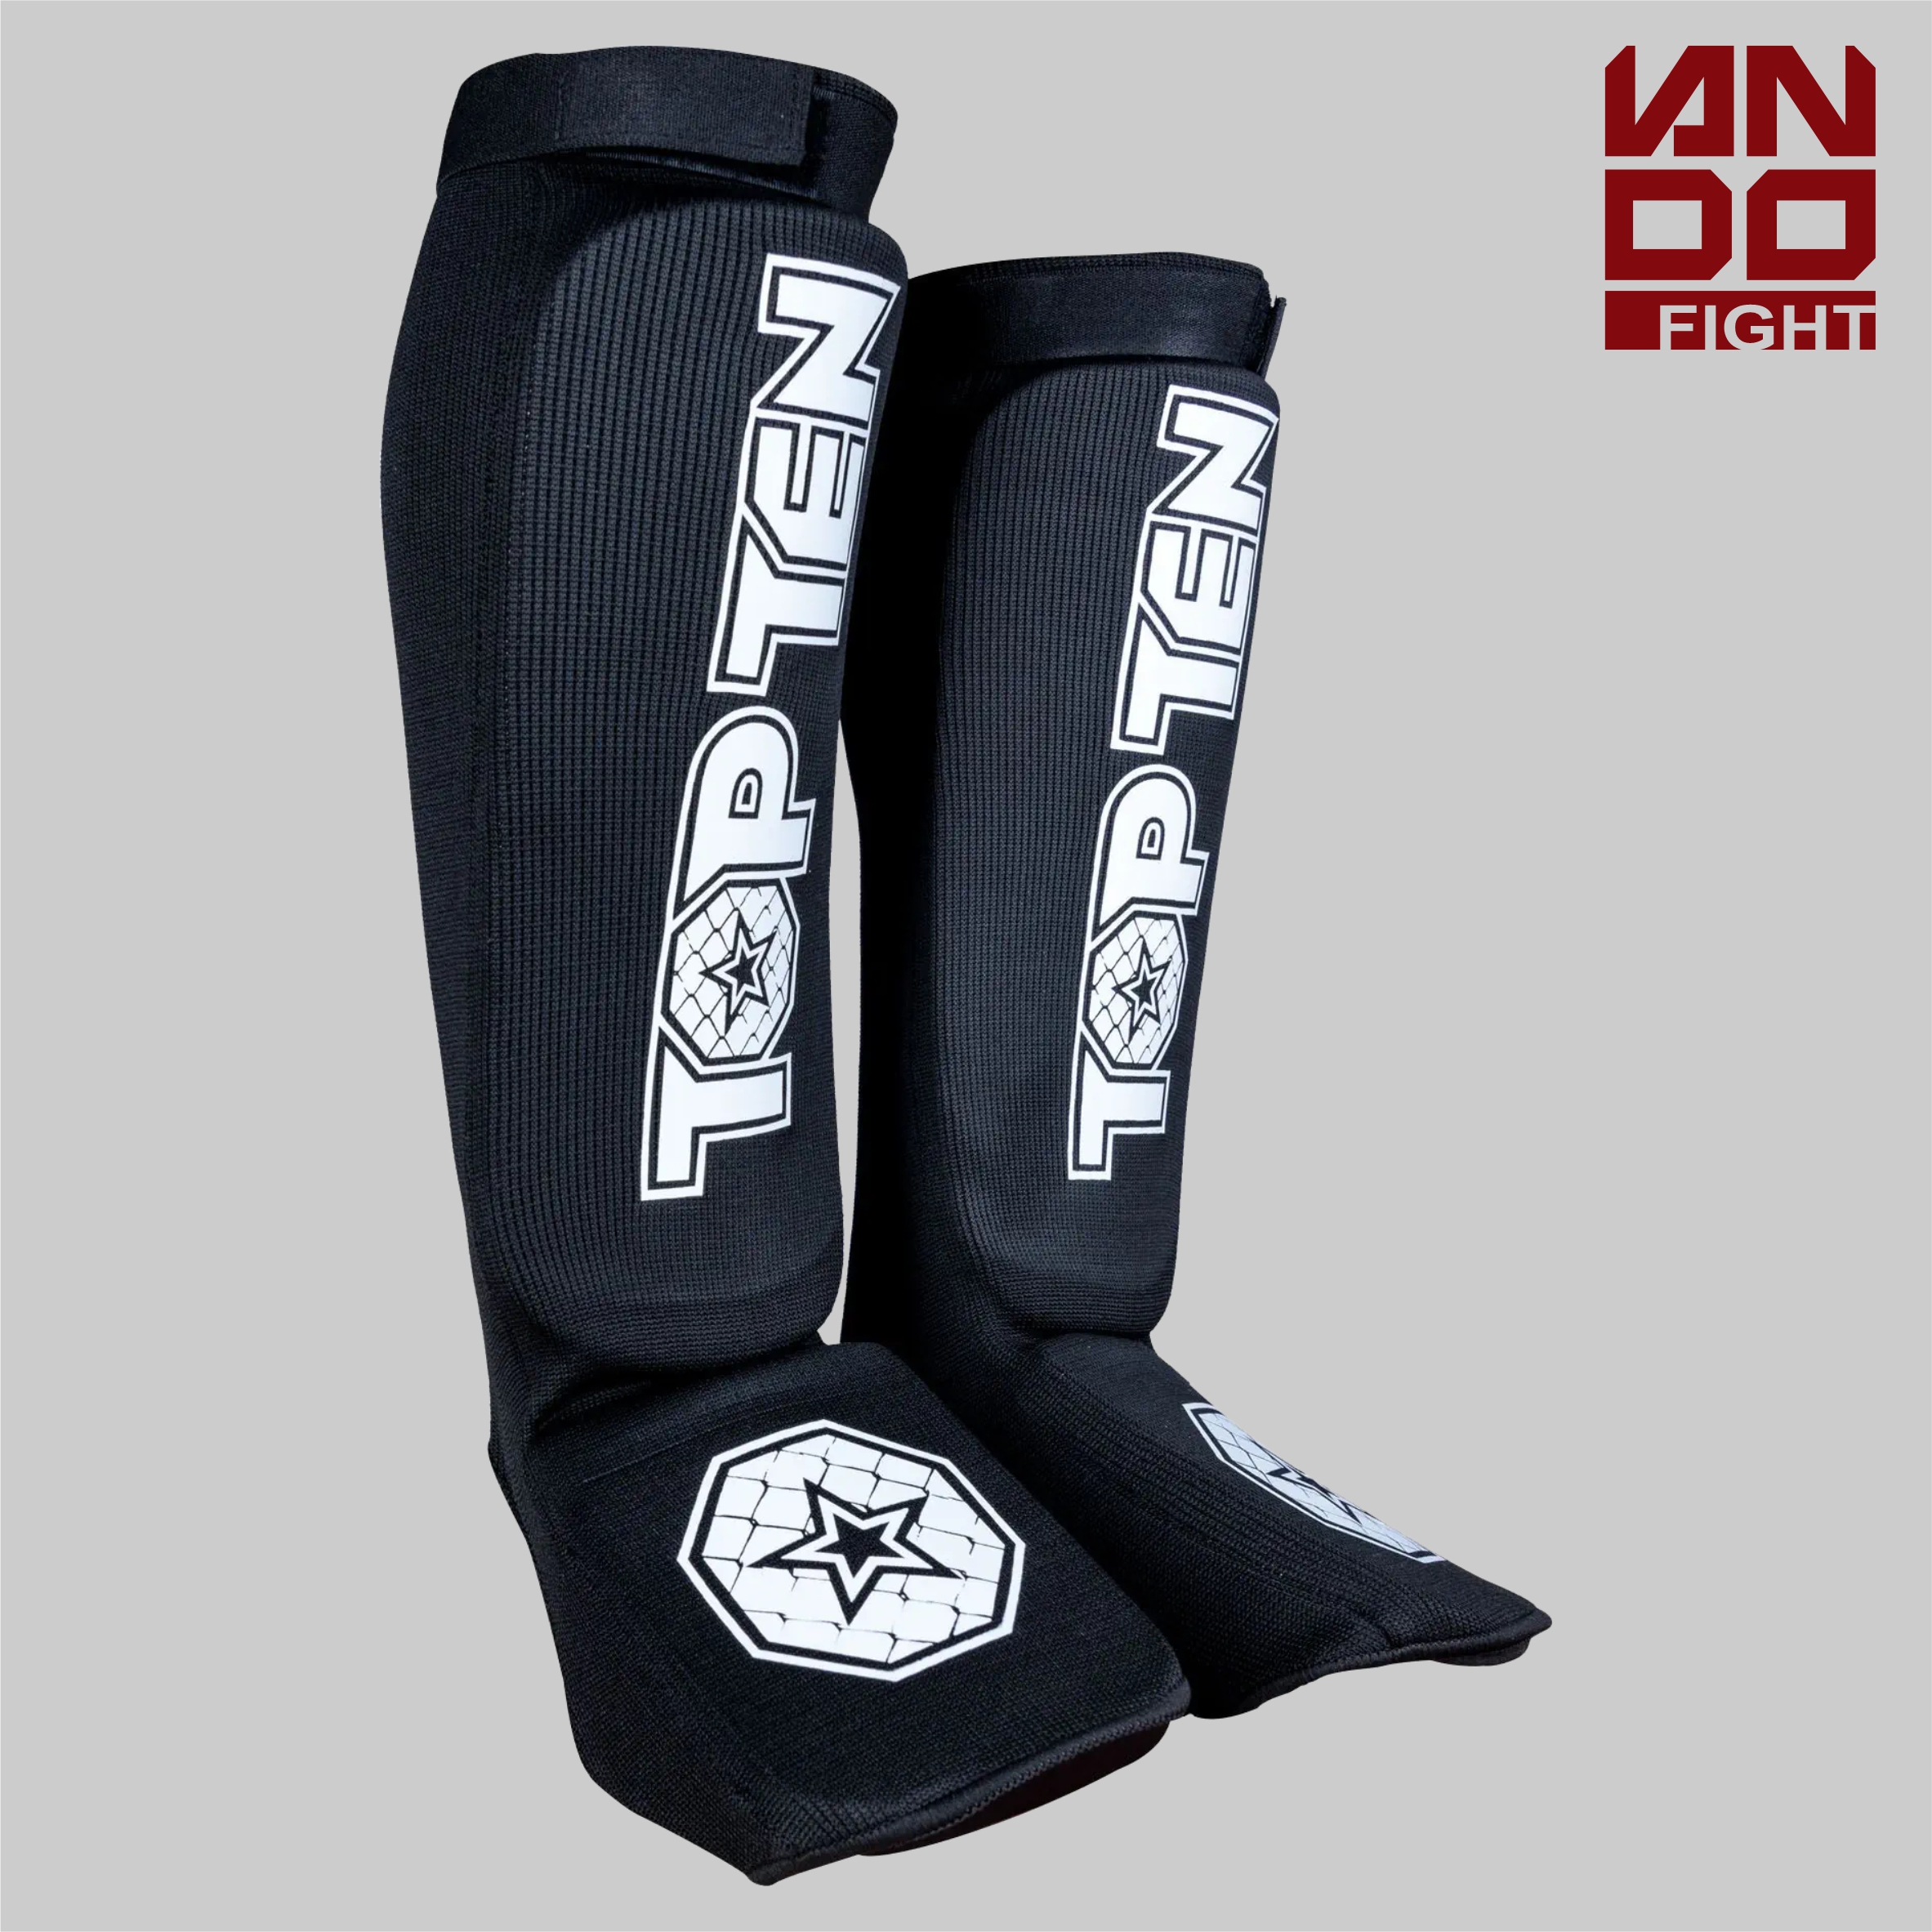 TOP TEN Shin- and Instep Guard “Contender”